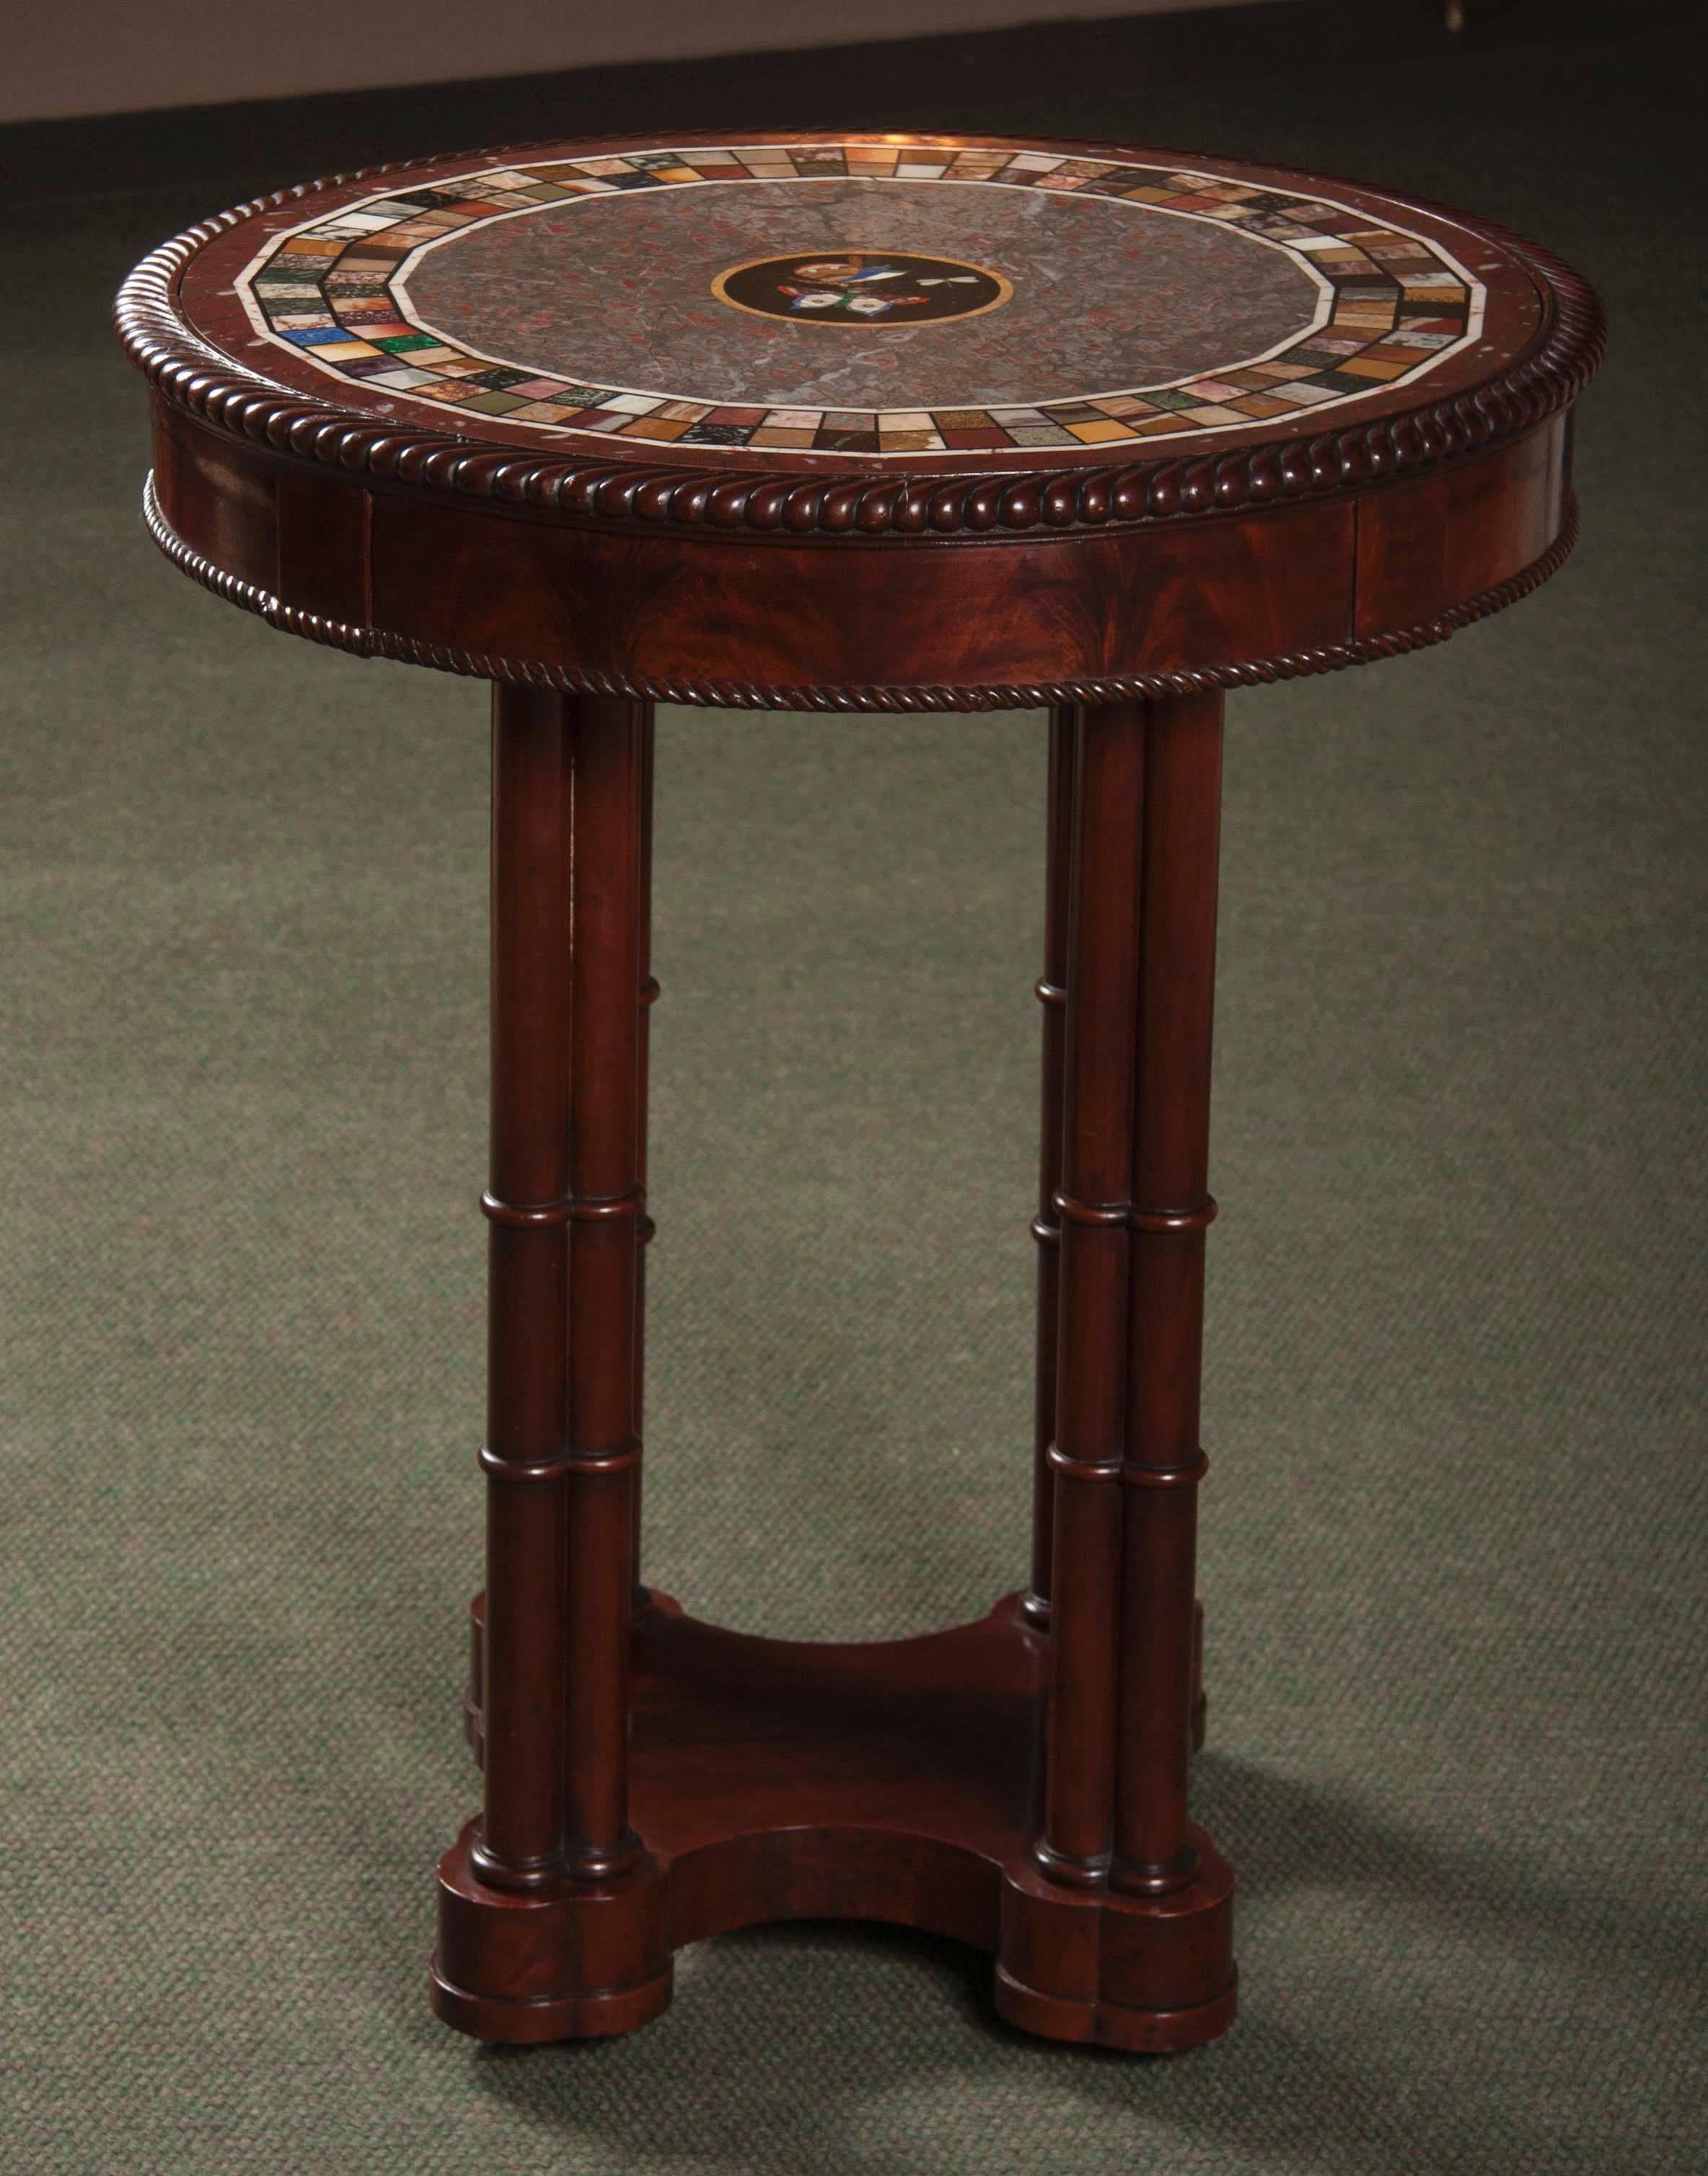 A small French, Charles X, mahogany center table on four column-shaped legs and an Italian specimen Pietra Dura marble top.